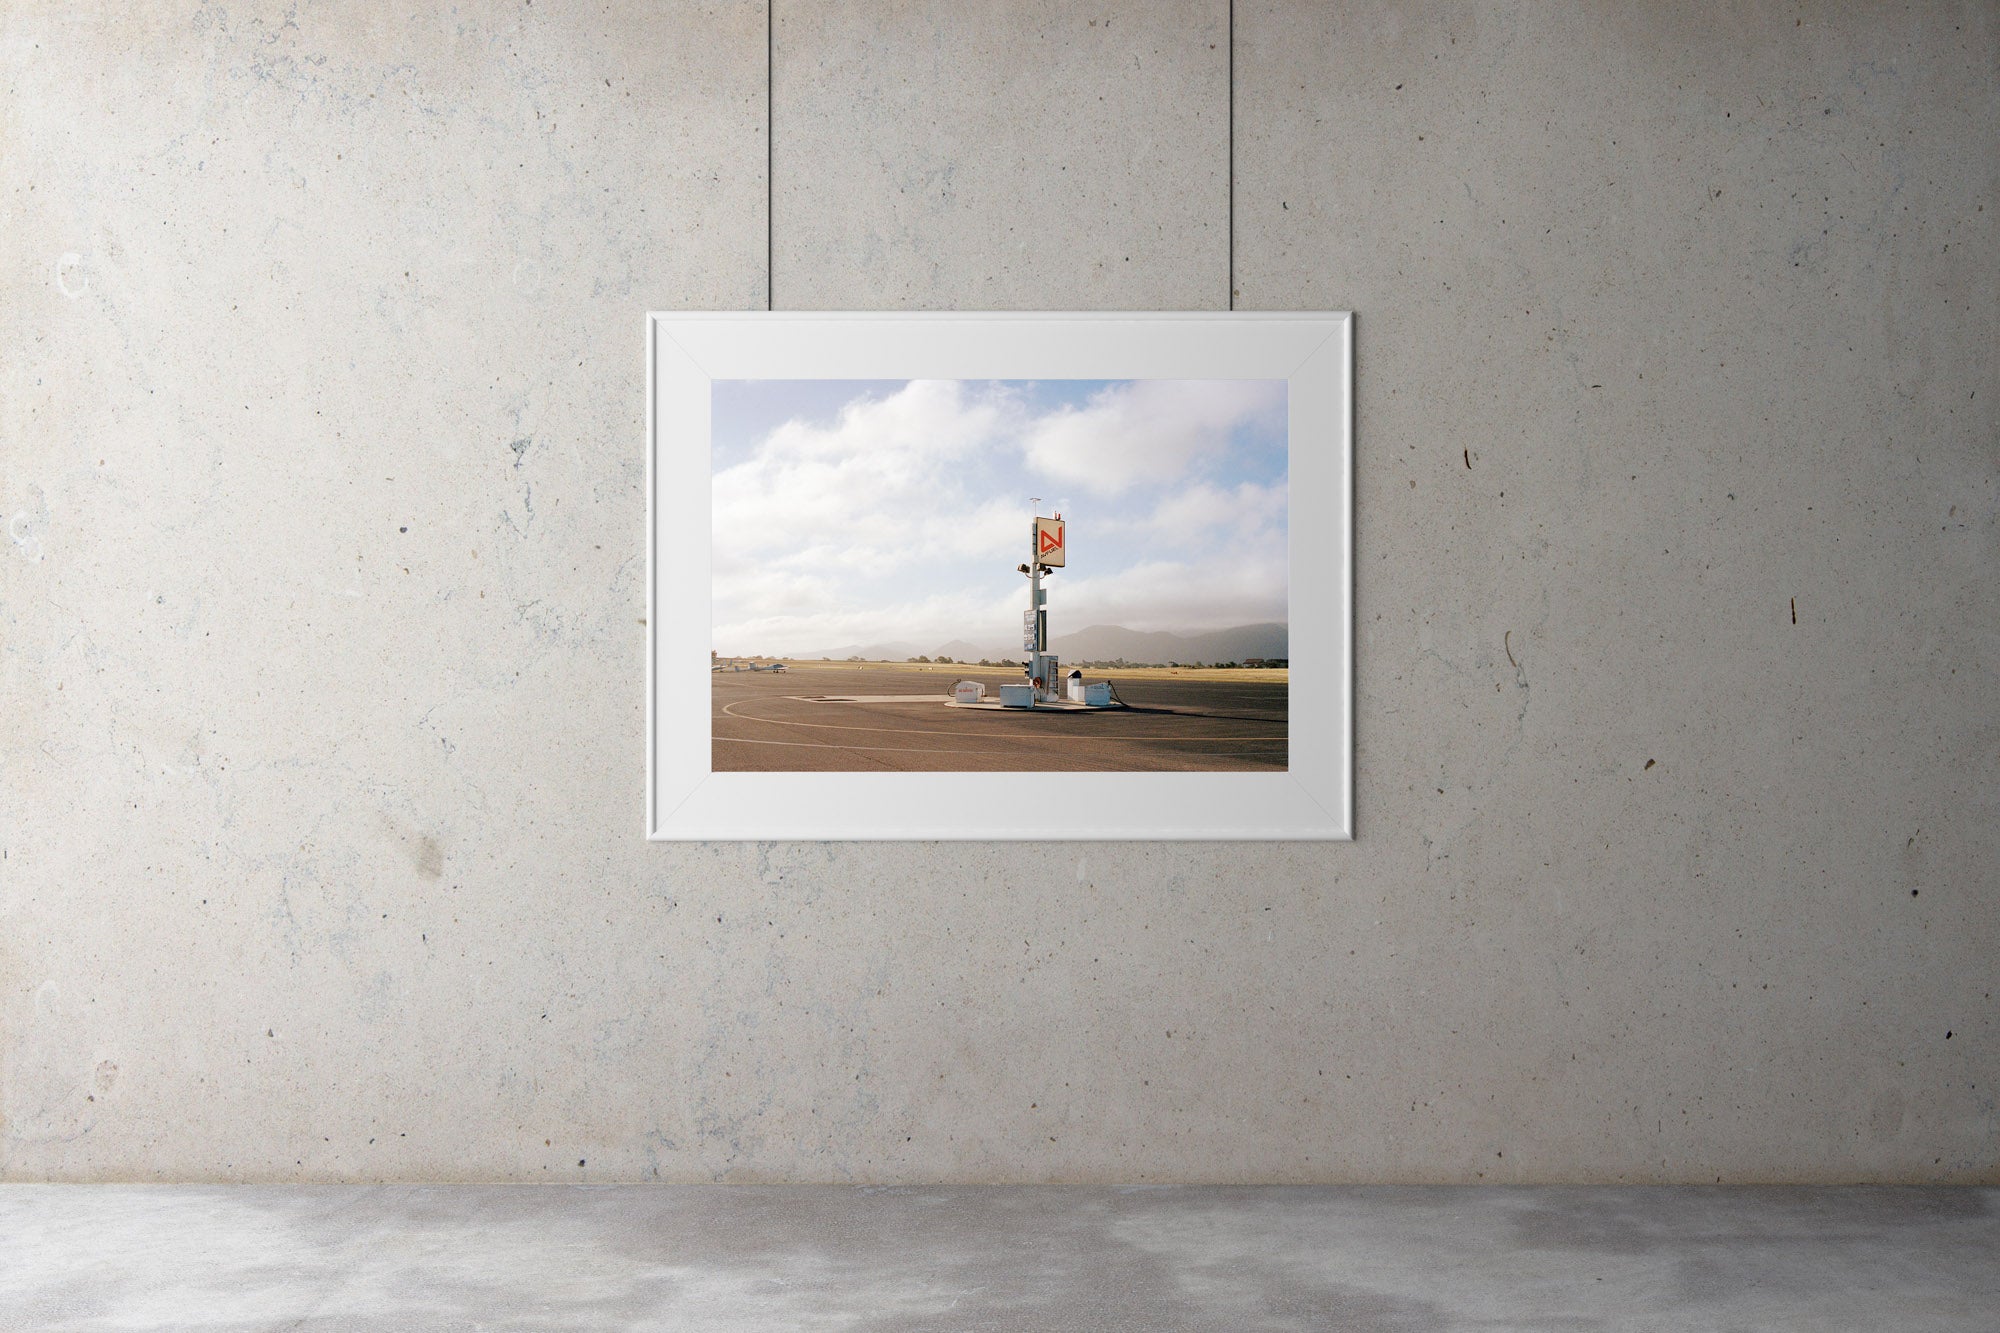 A photographic print gallery with an image on the wall. A photograph of an old airfield with a petrol filling station & old airplanes in the photo. Blue skies & clouds in the background. USA